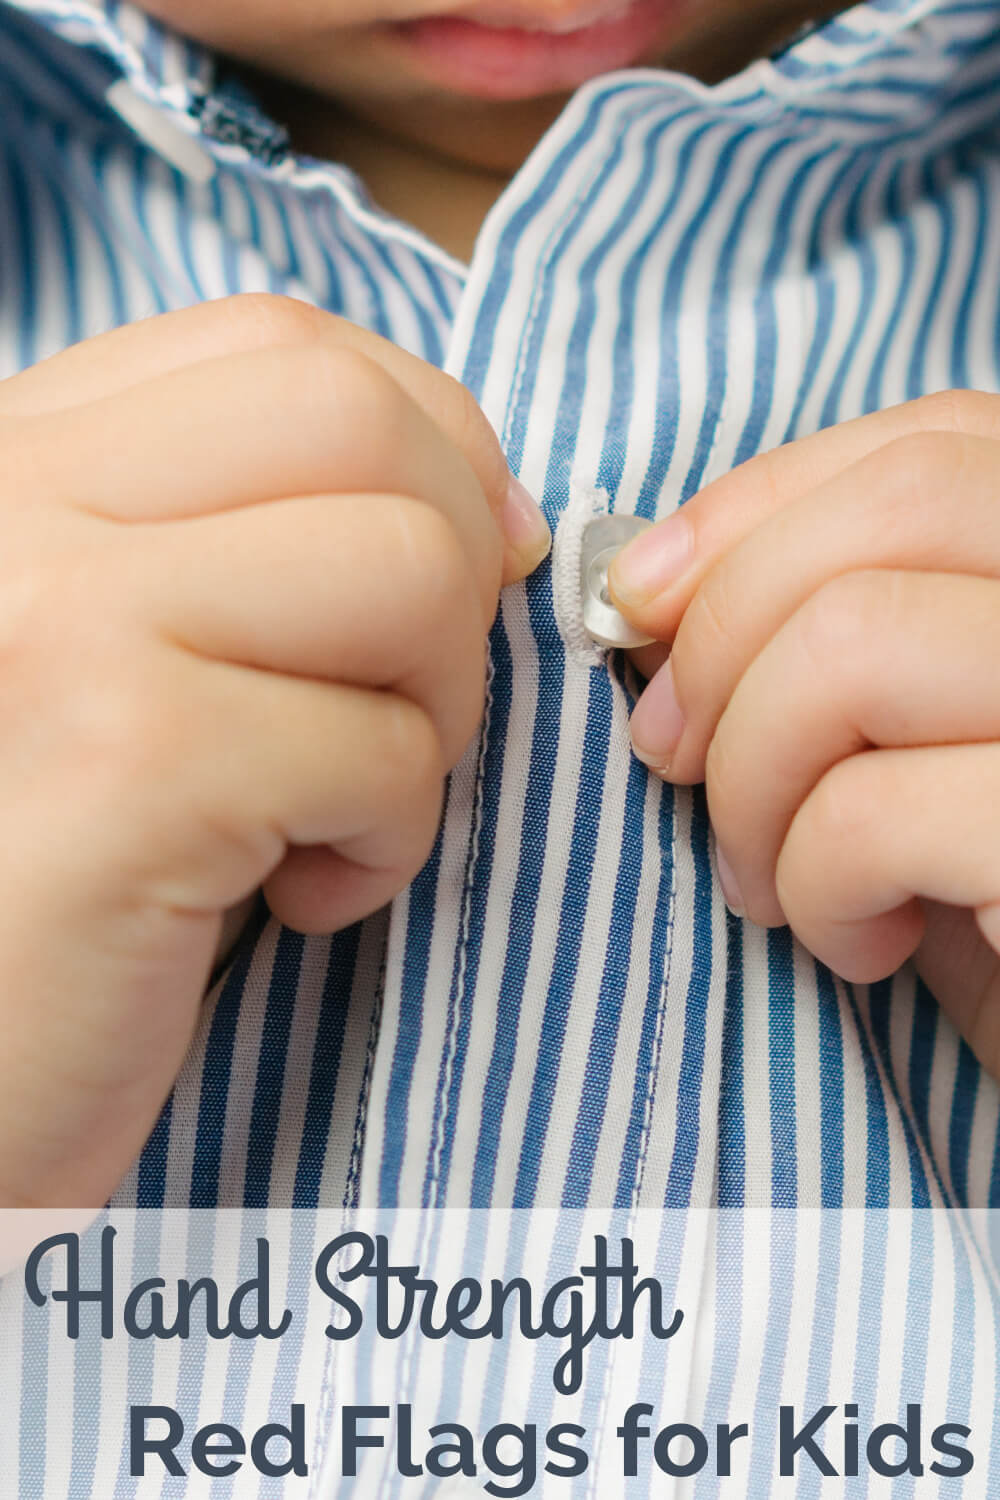 Child's hands buttoning a shirt with text about hand strength for kids